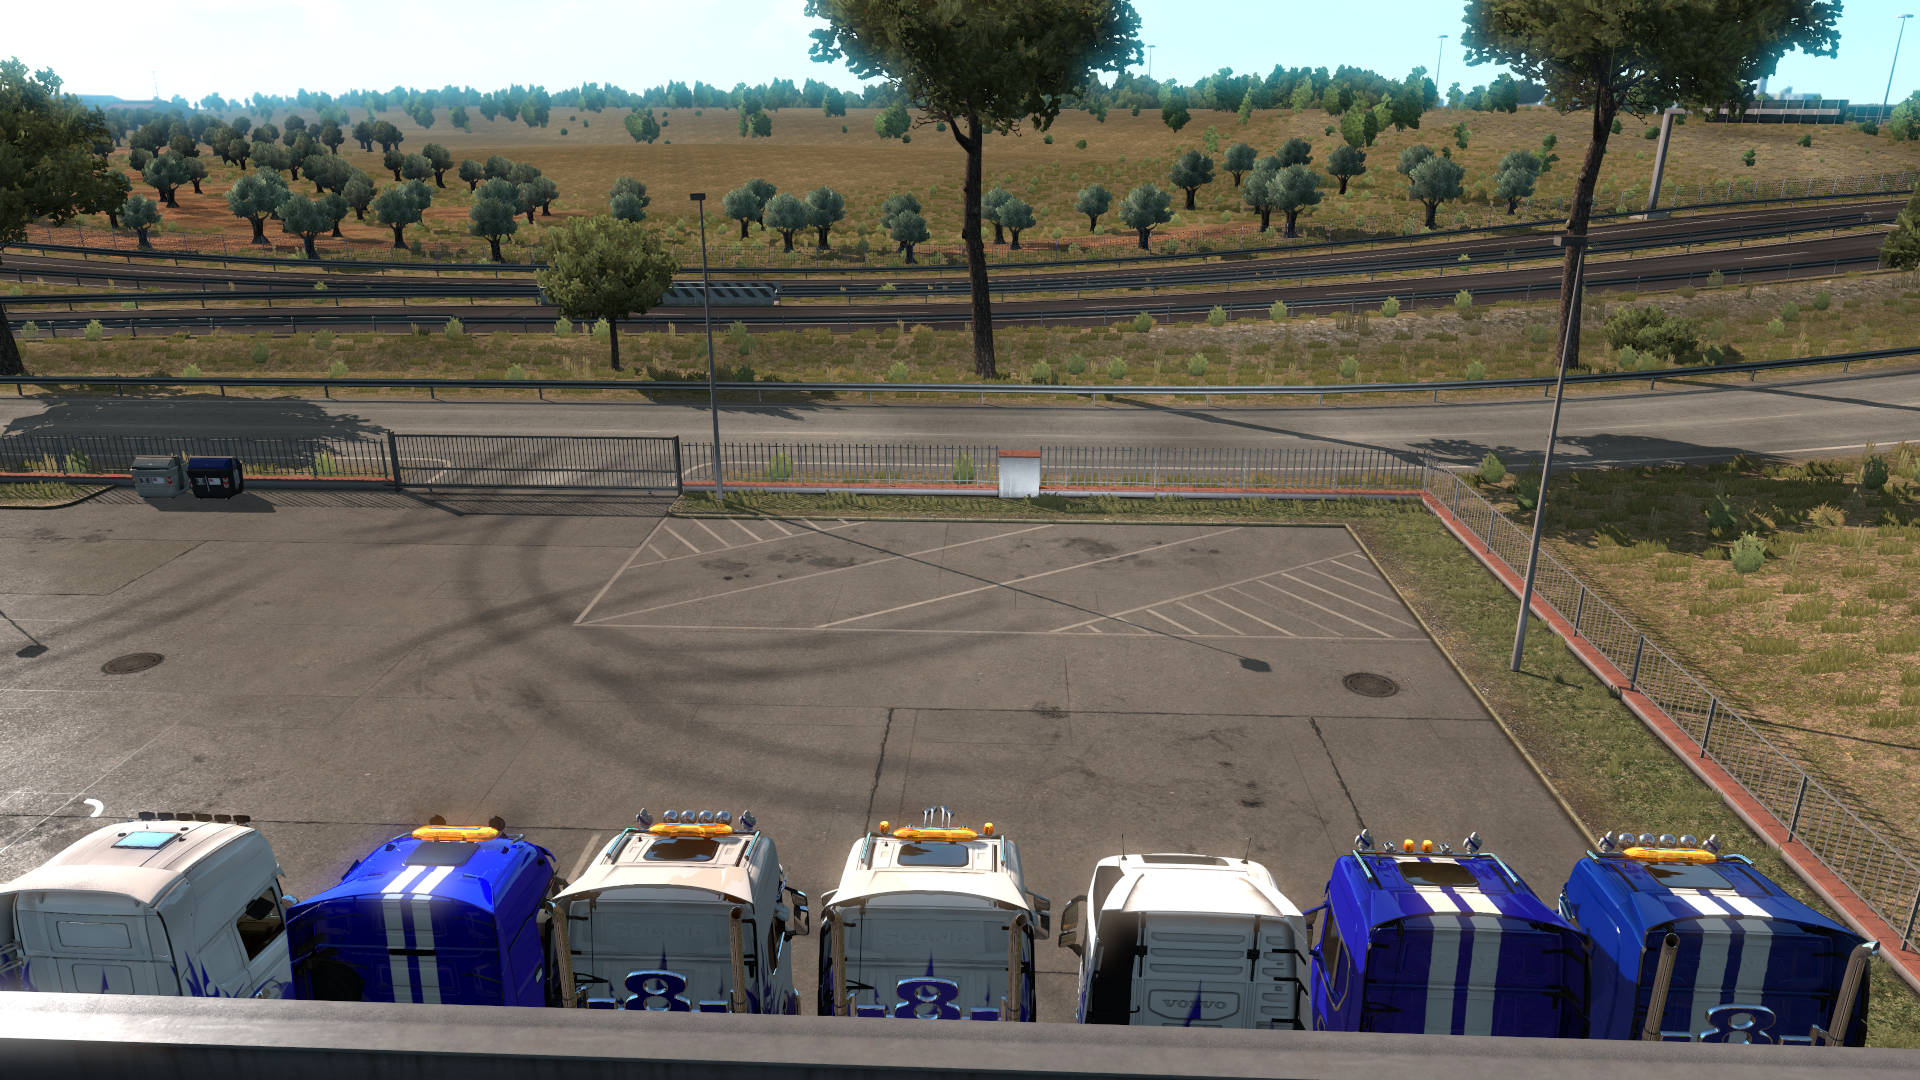 ets2_20200311_205423_00.png